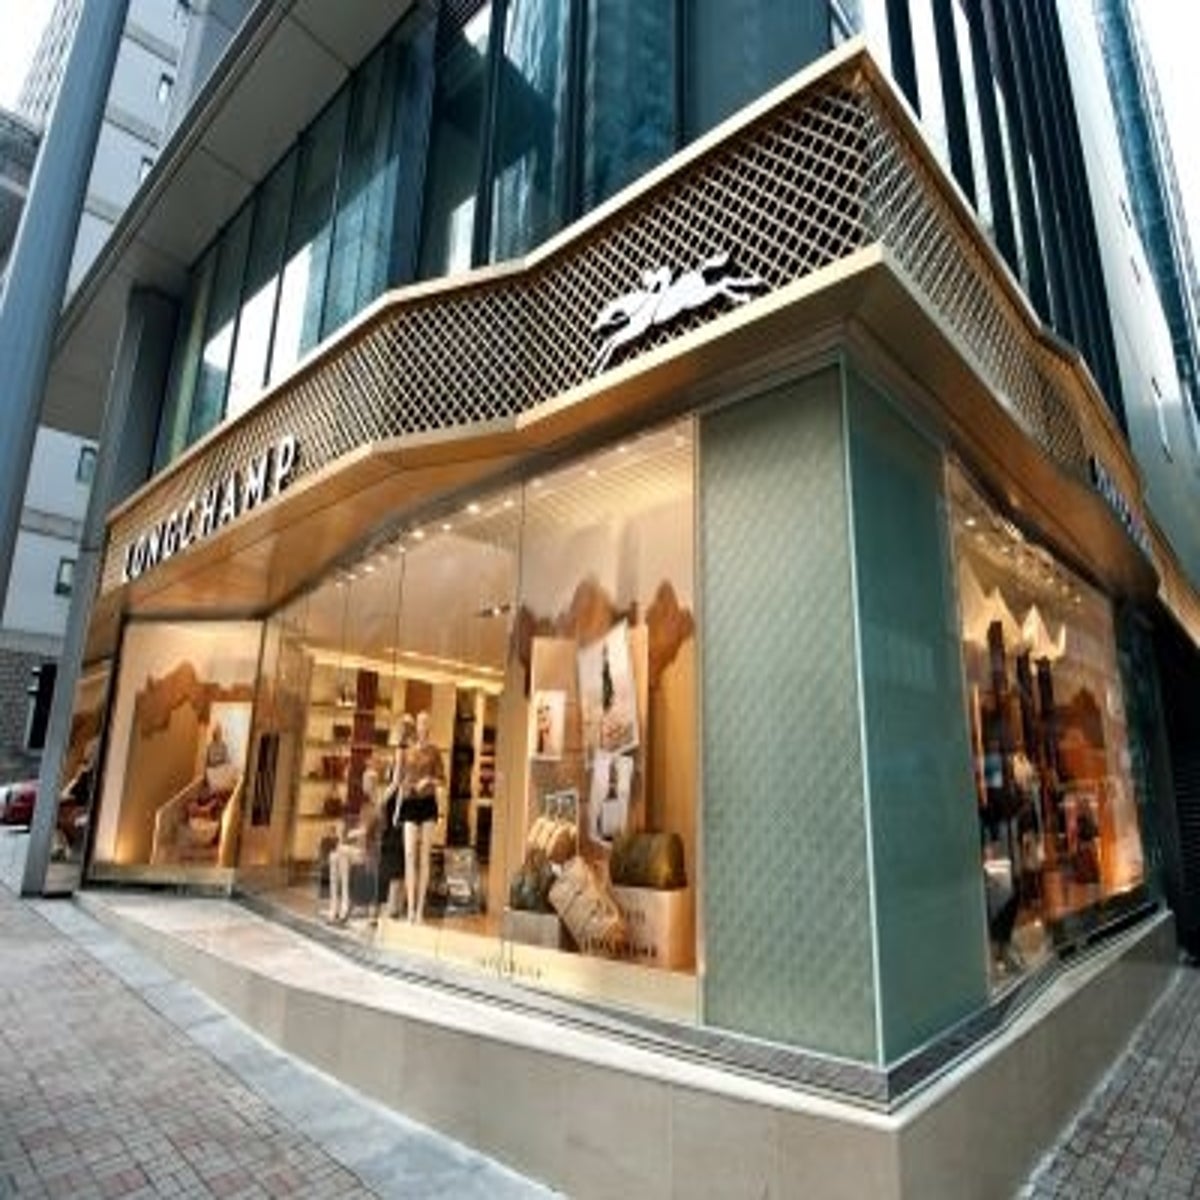 Bottega Veneta opens its largest store in Asia in Tokyo's Ginza district